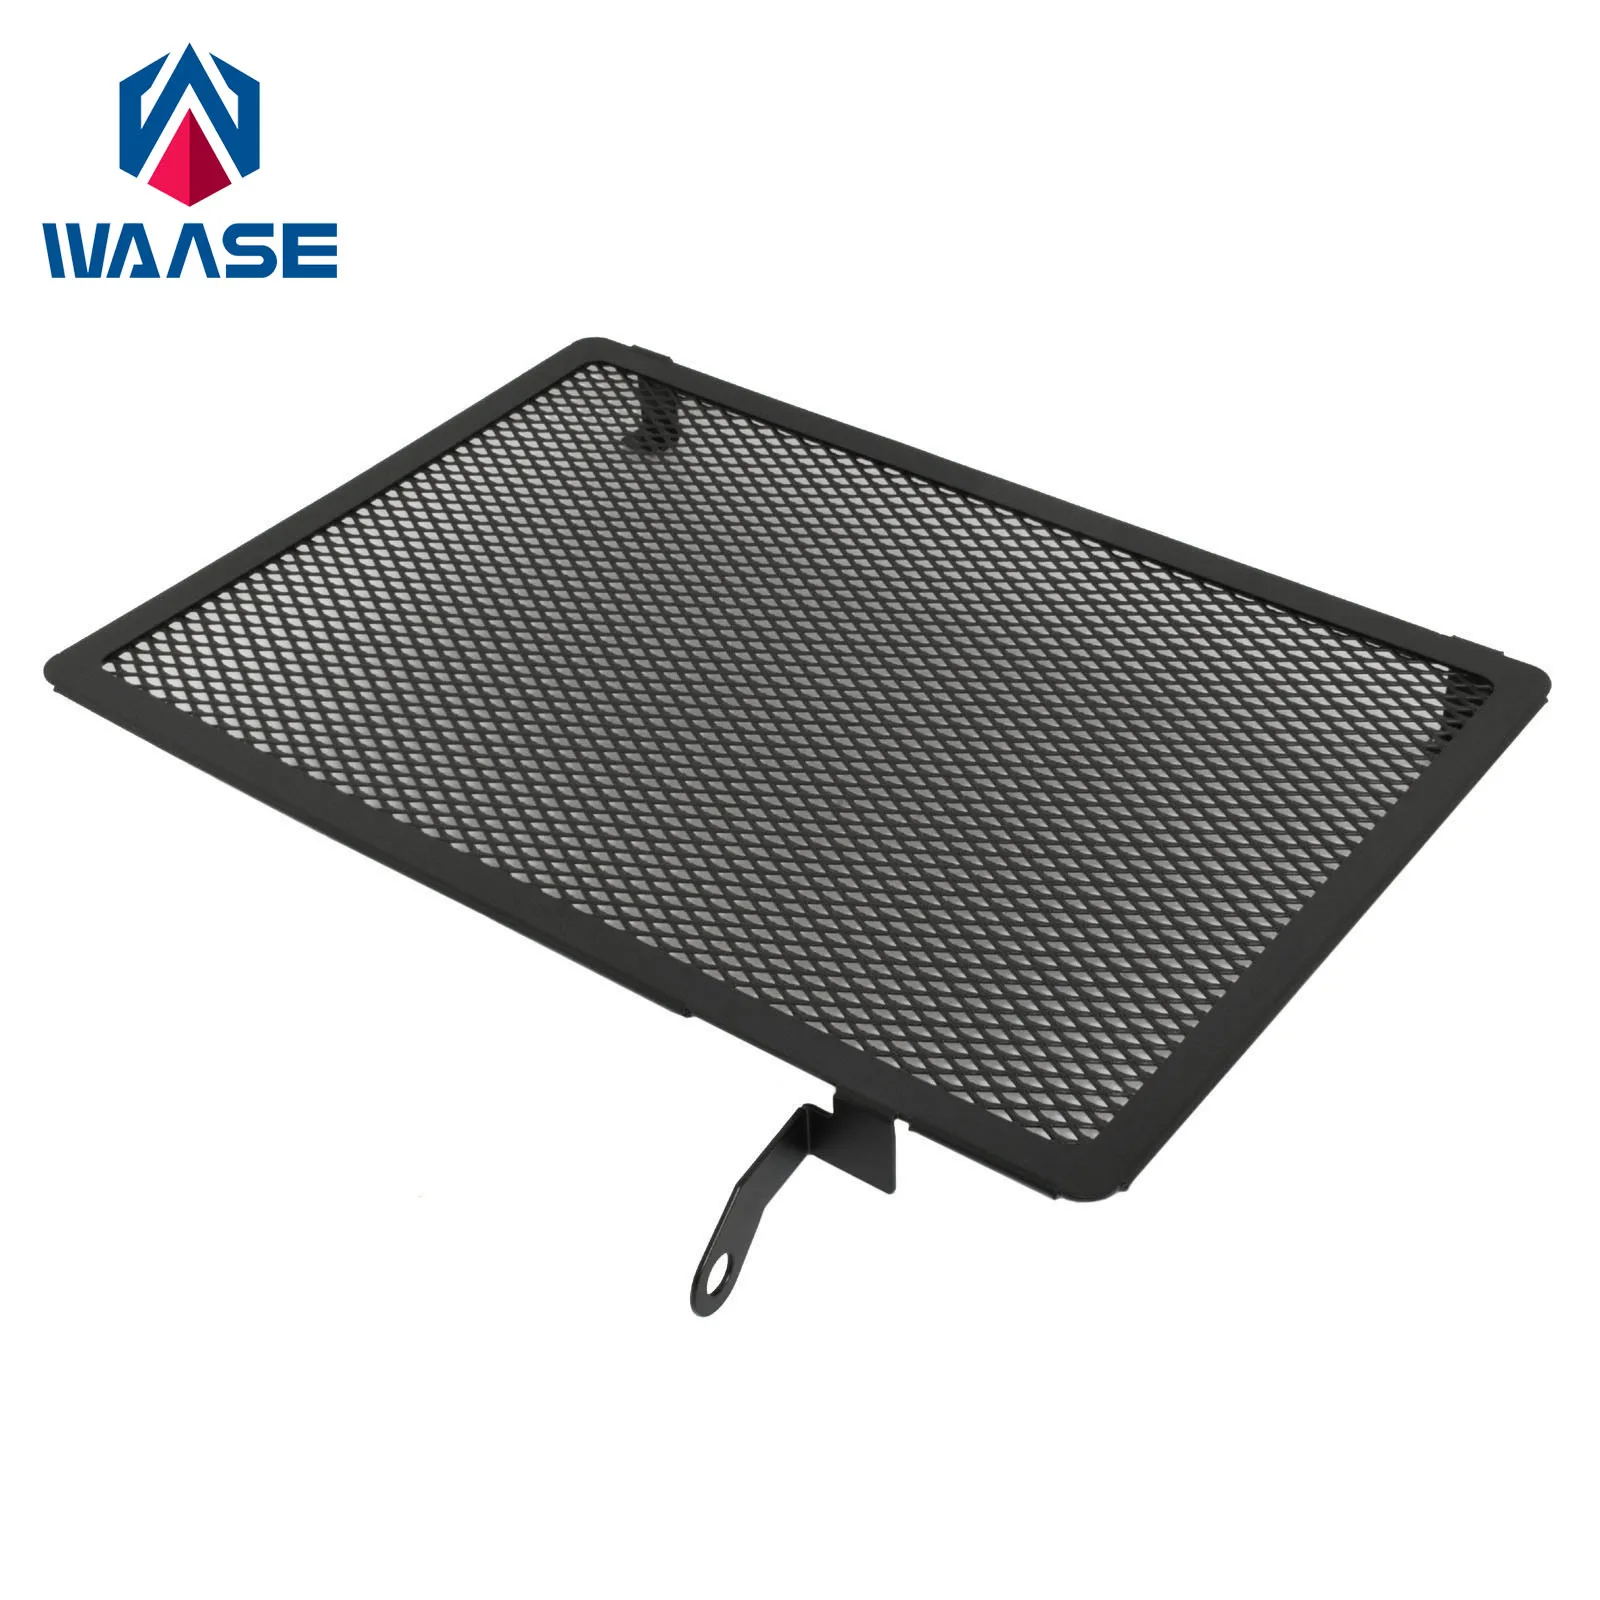 

waase Black Radiator Water Grille Cover Guard Protector For DUCATI Multistrada 1200 / S 1200S 2010 2011 2012 2013 2014 2015 2016